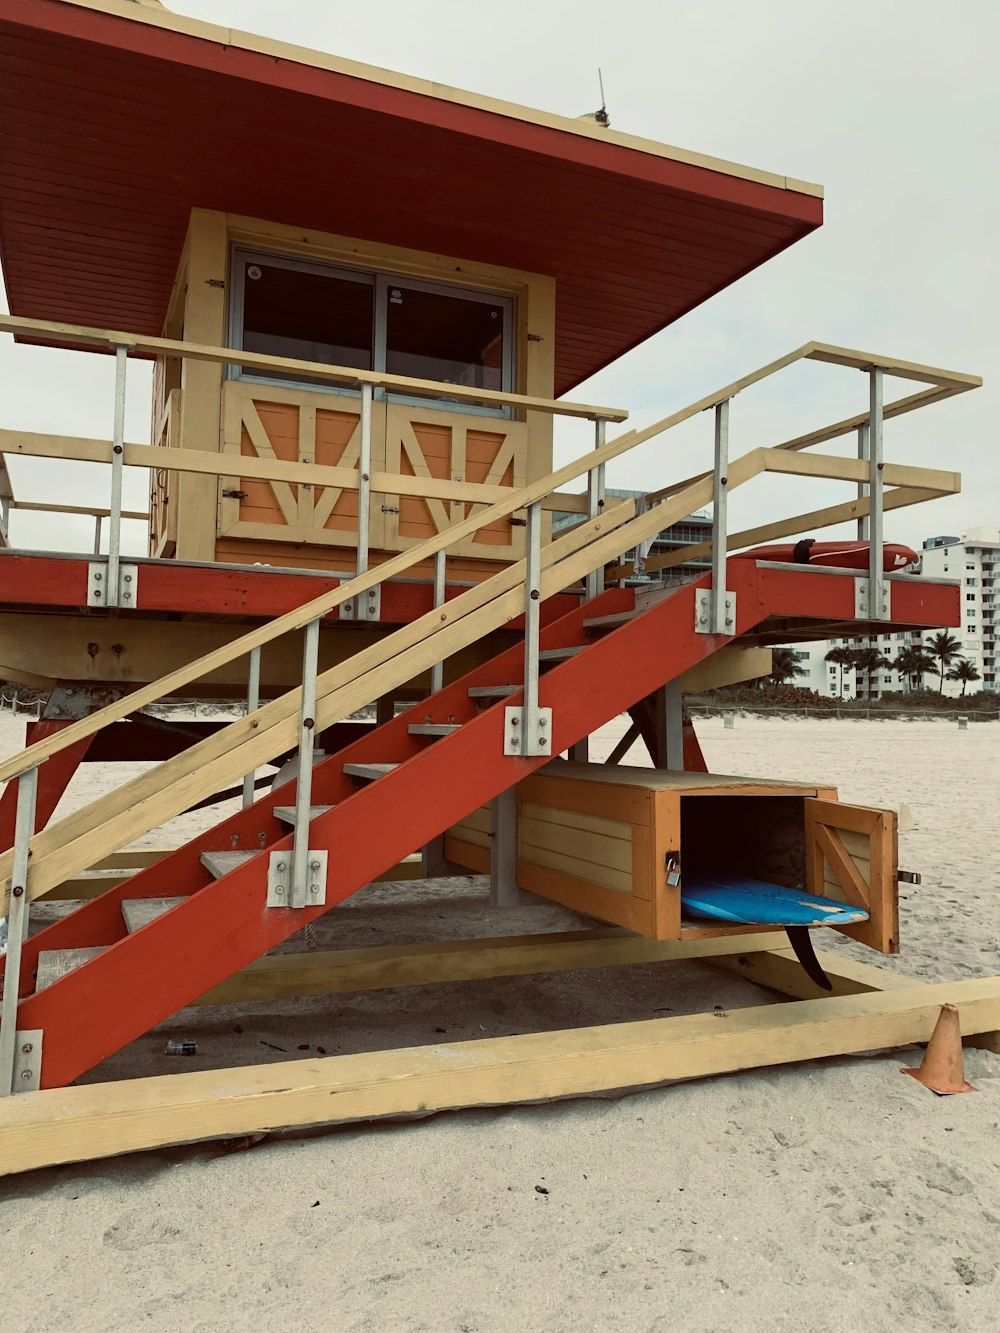 a lifeguard station on the beach with a surfboard under it